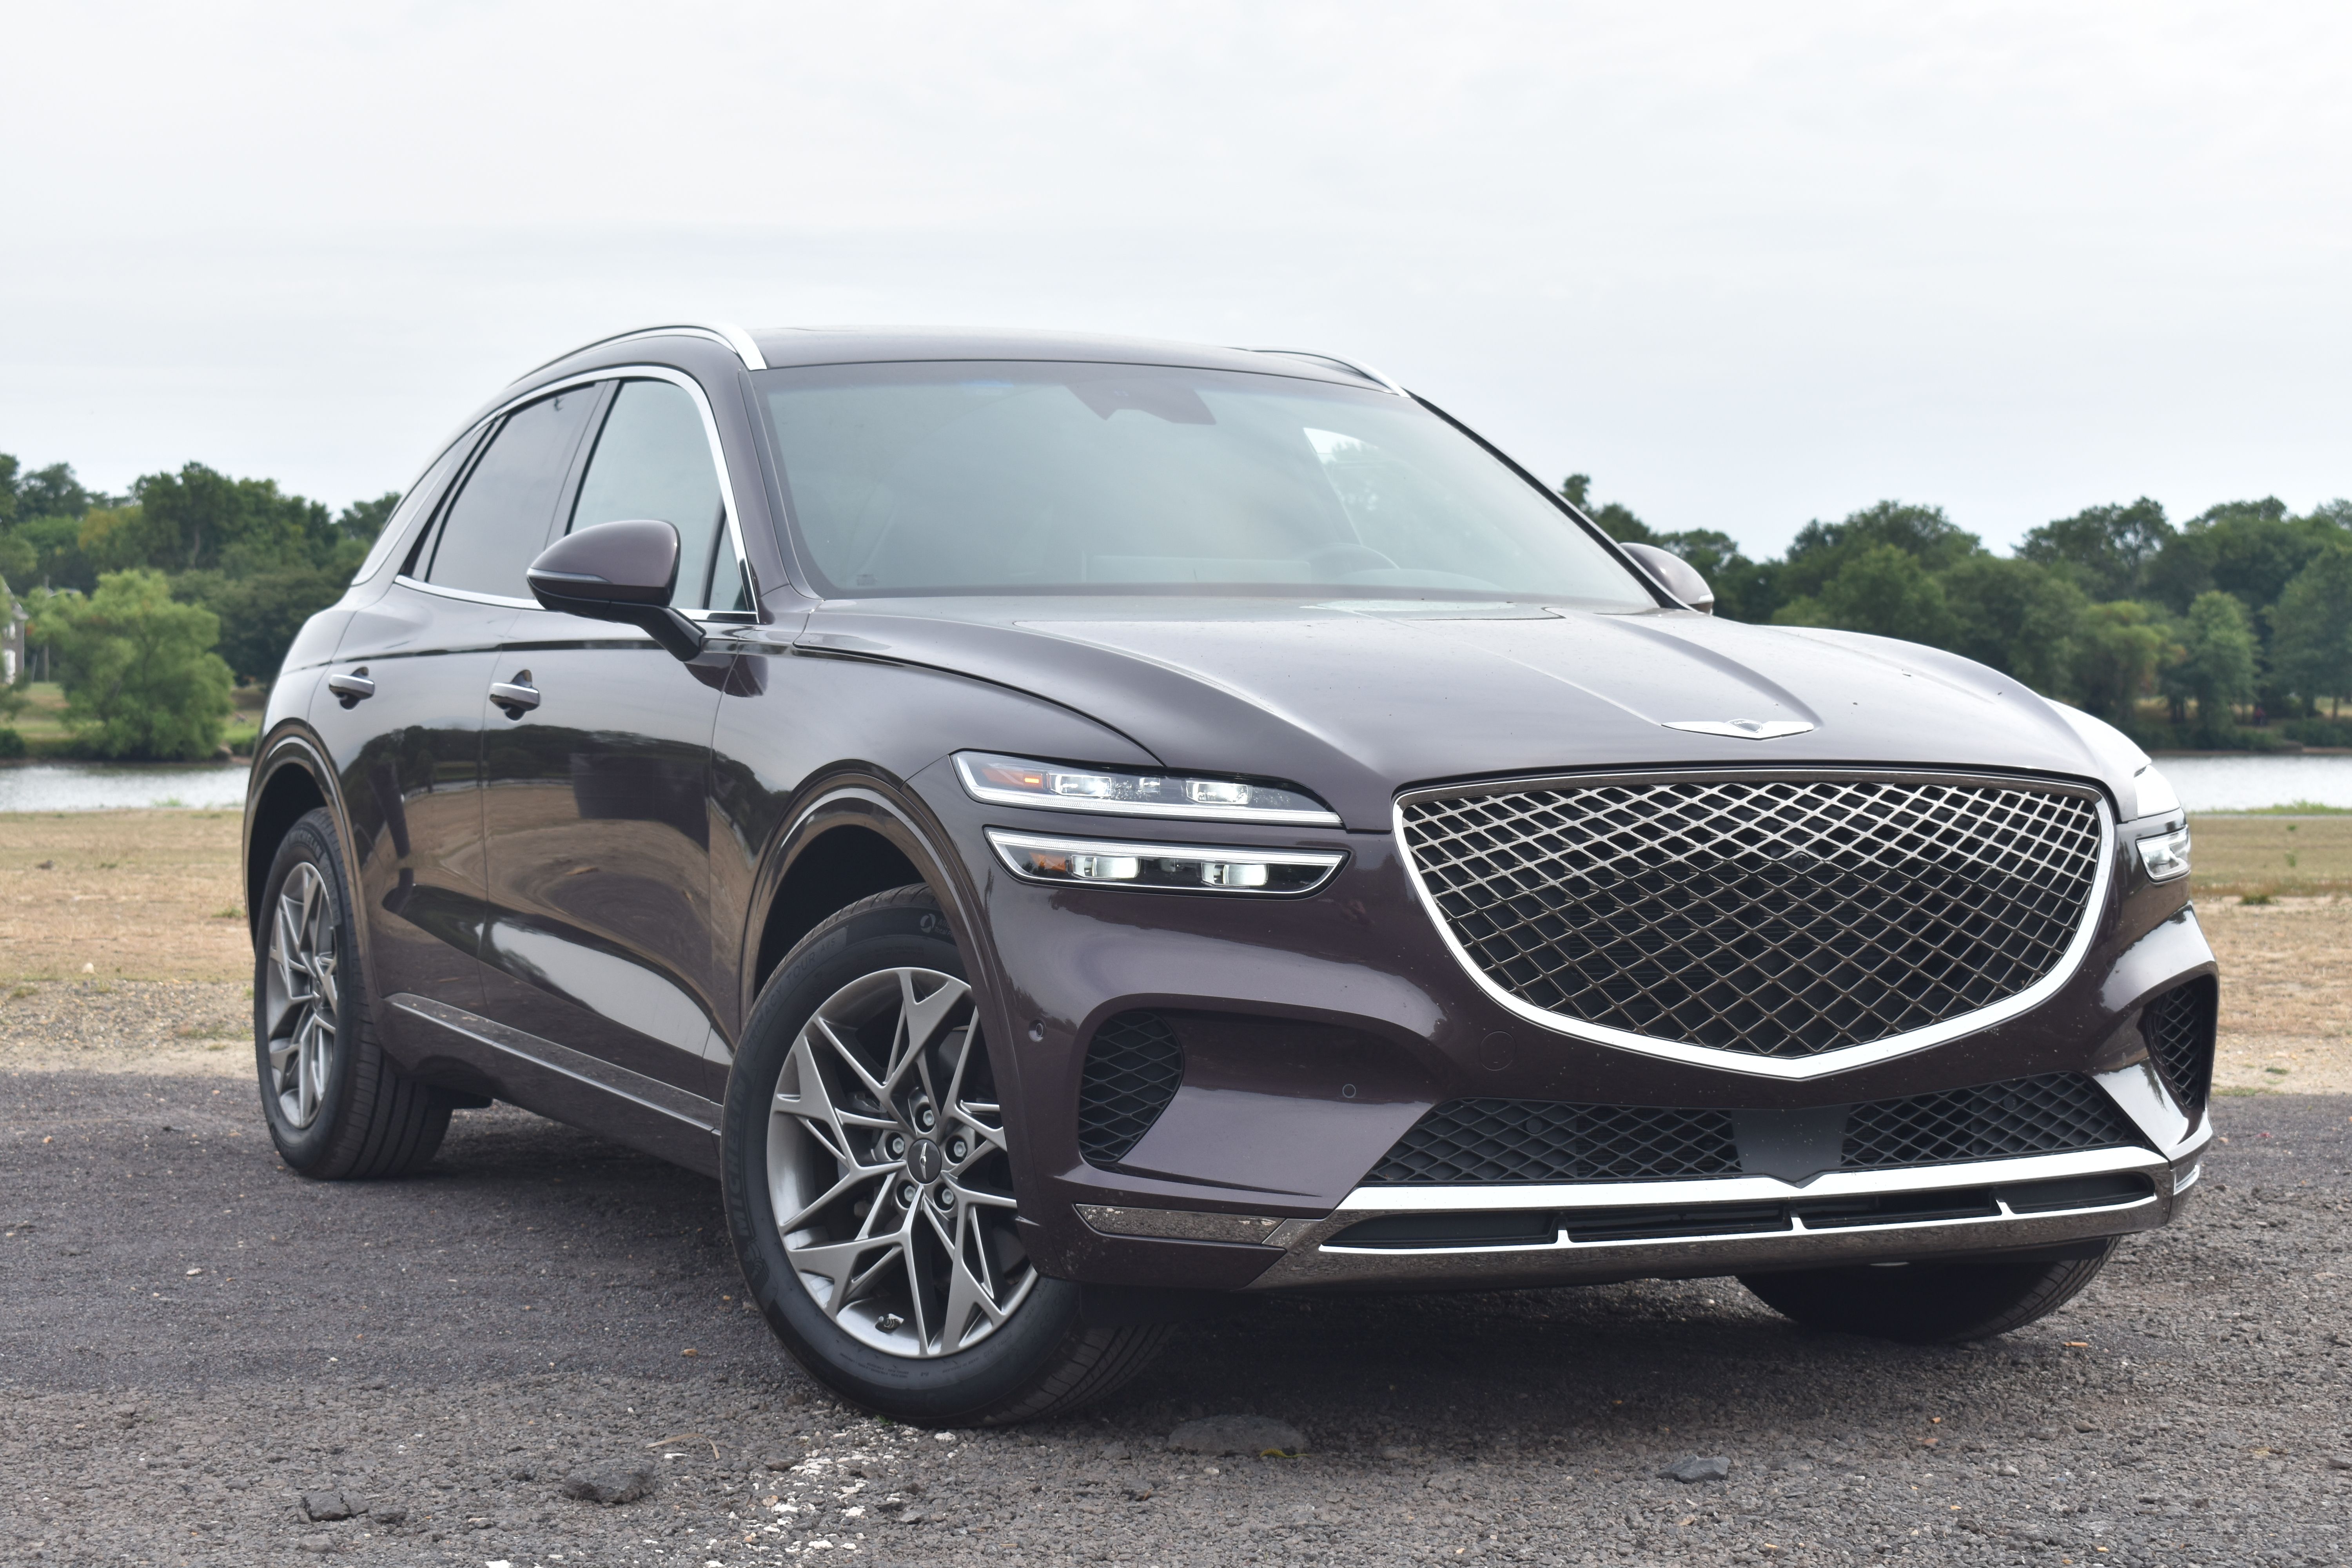 2022 Genesis GV70 2.5T AWD Review: A Luxury SUV for the Masses